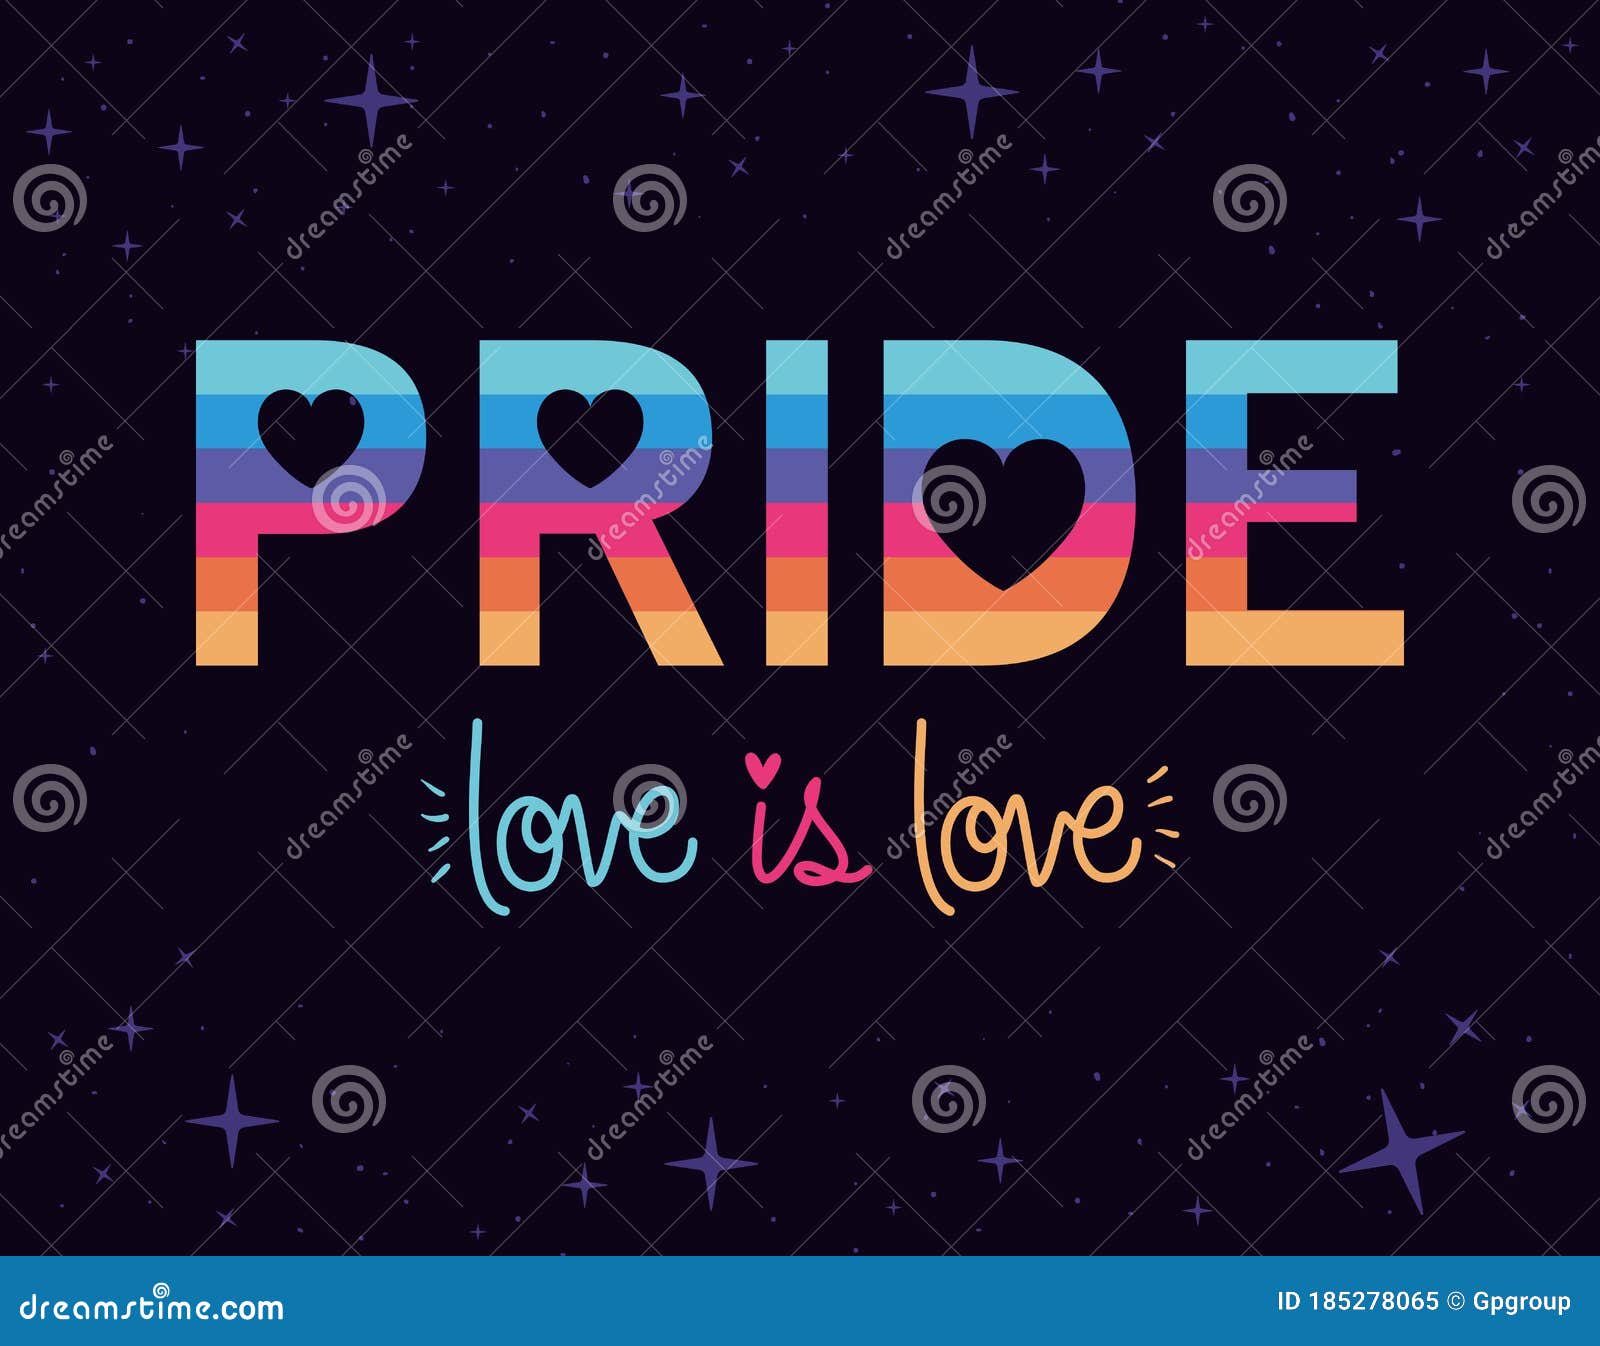 Lgtbi Pride And Love Is Love Text Vector Design Stock Vector Illustration Of Text Lgtbi 